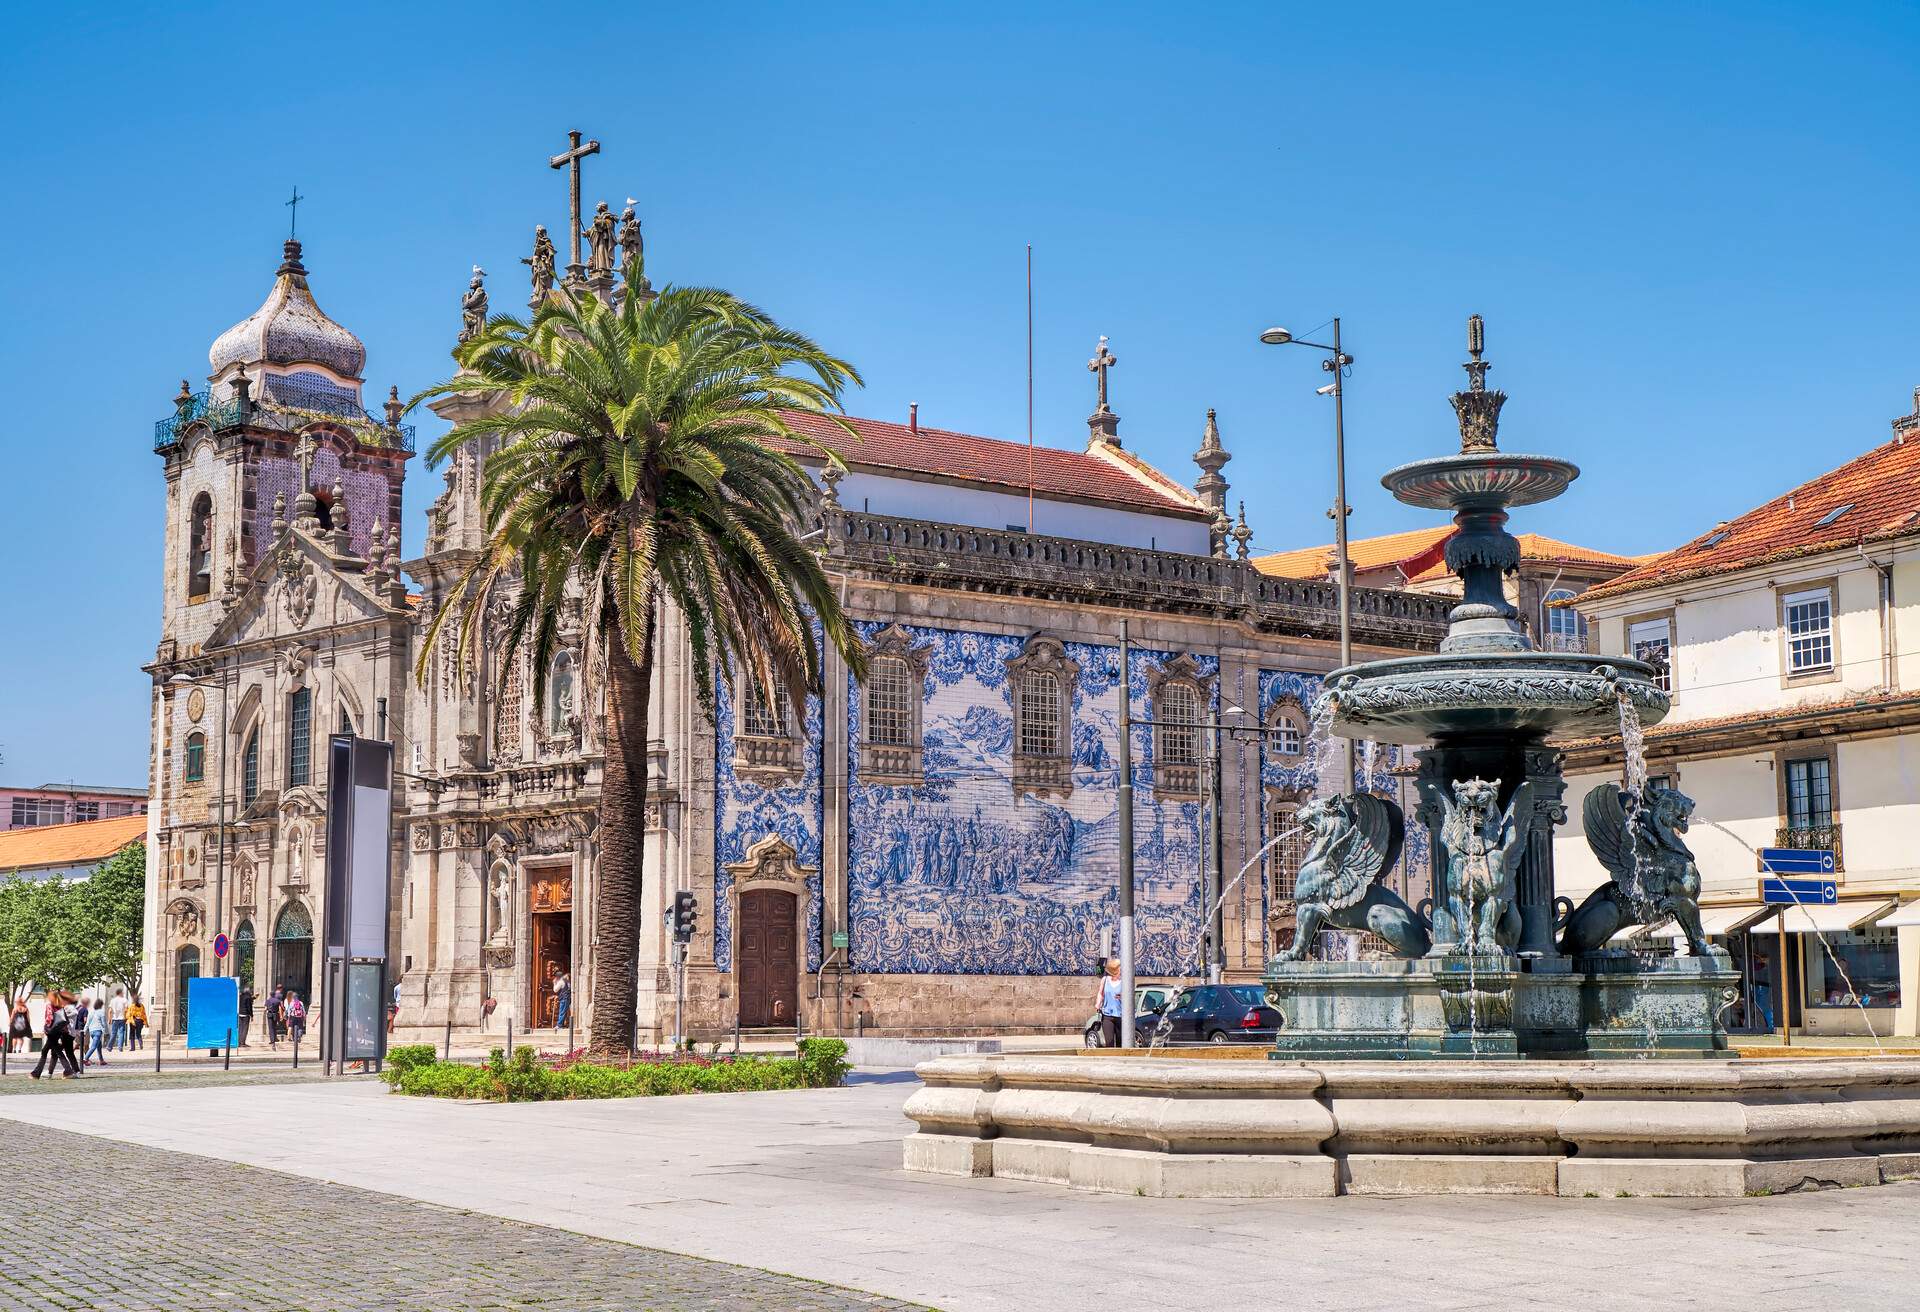 PORTO, PORTUGAL - APRIL 25, 2018: Carmelites church with Our Lady of Mount Carmel in the center of Porto, Portugal.